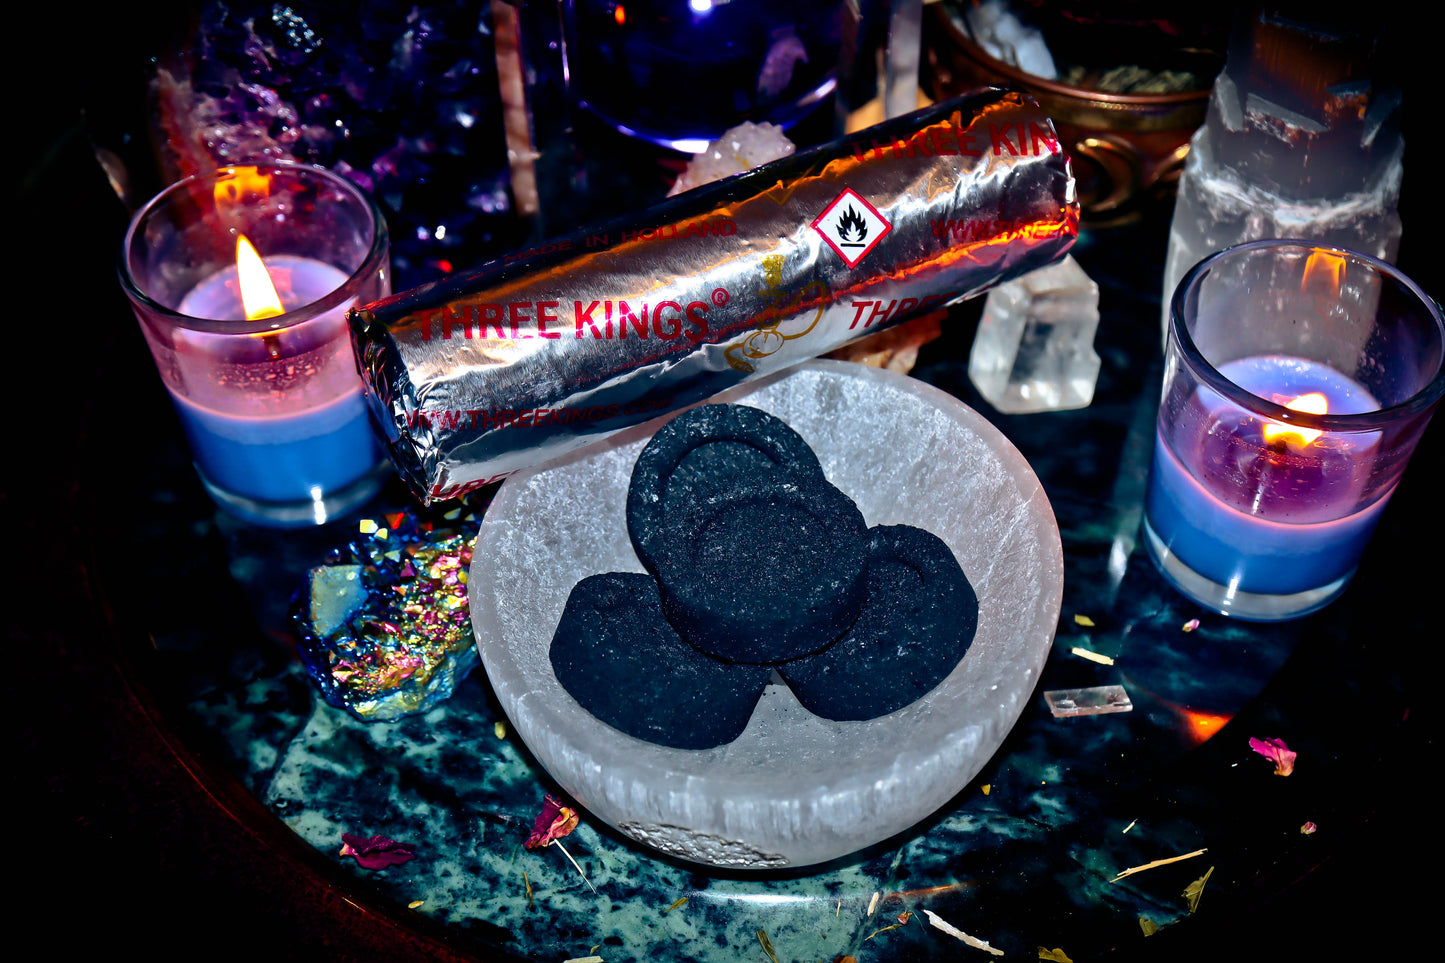 CHARCOAL DISK TABLET 33mm Self Lighting ~ One Roll of 10 Disks ~ For Spirit Offerings of Incense, Resin & Herbs!